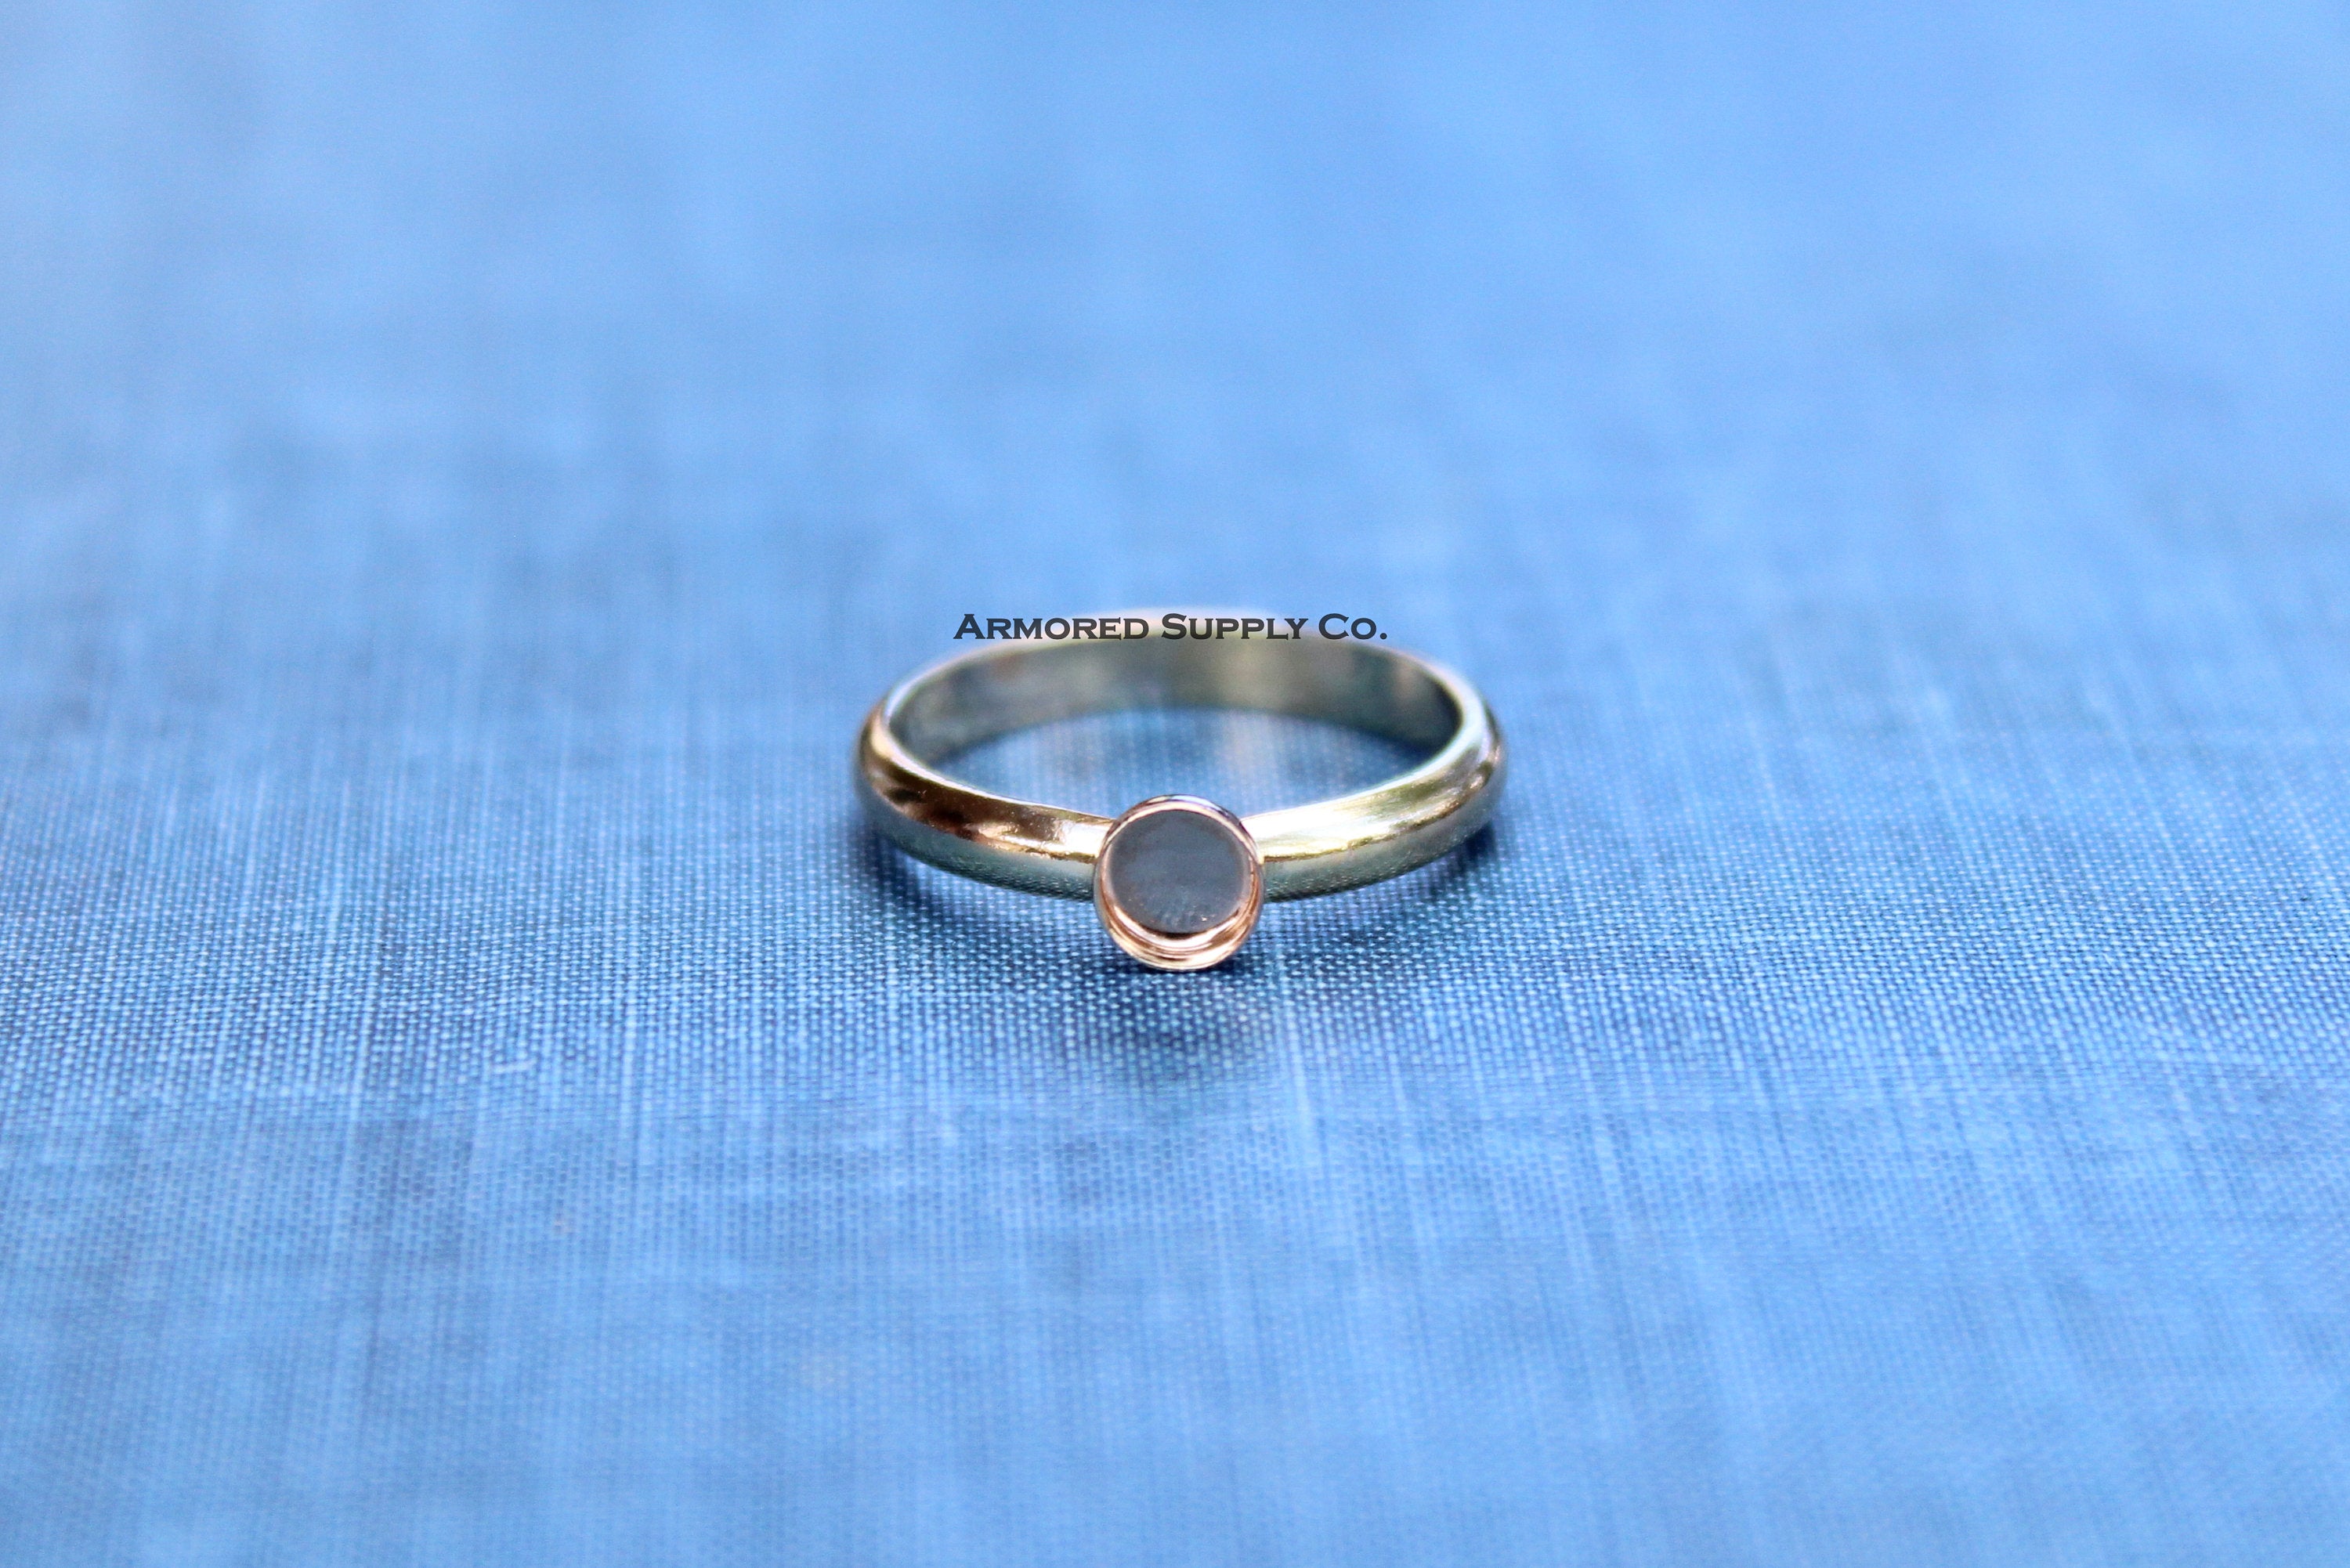 Gold Filled 5mm Bezel Cup Ring blank, Half Round Ring Band, Breast Milk DIY ring, DIY jewelry supplies, wholesale jewelry, diy ring blank